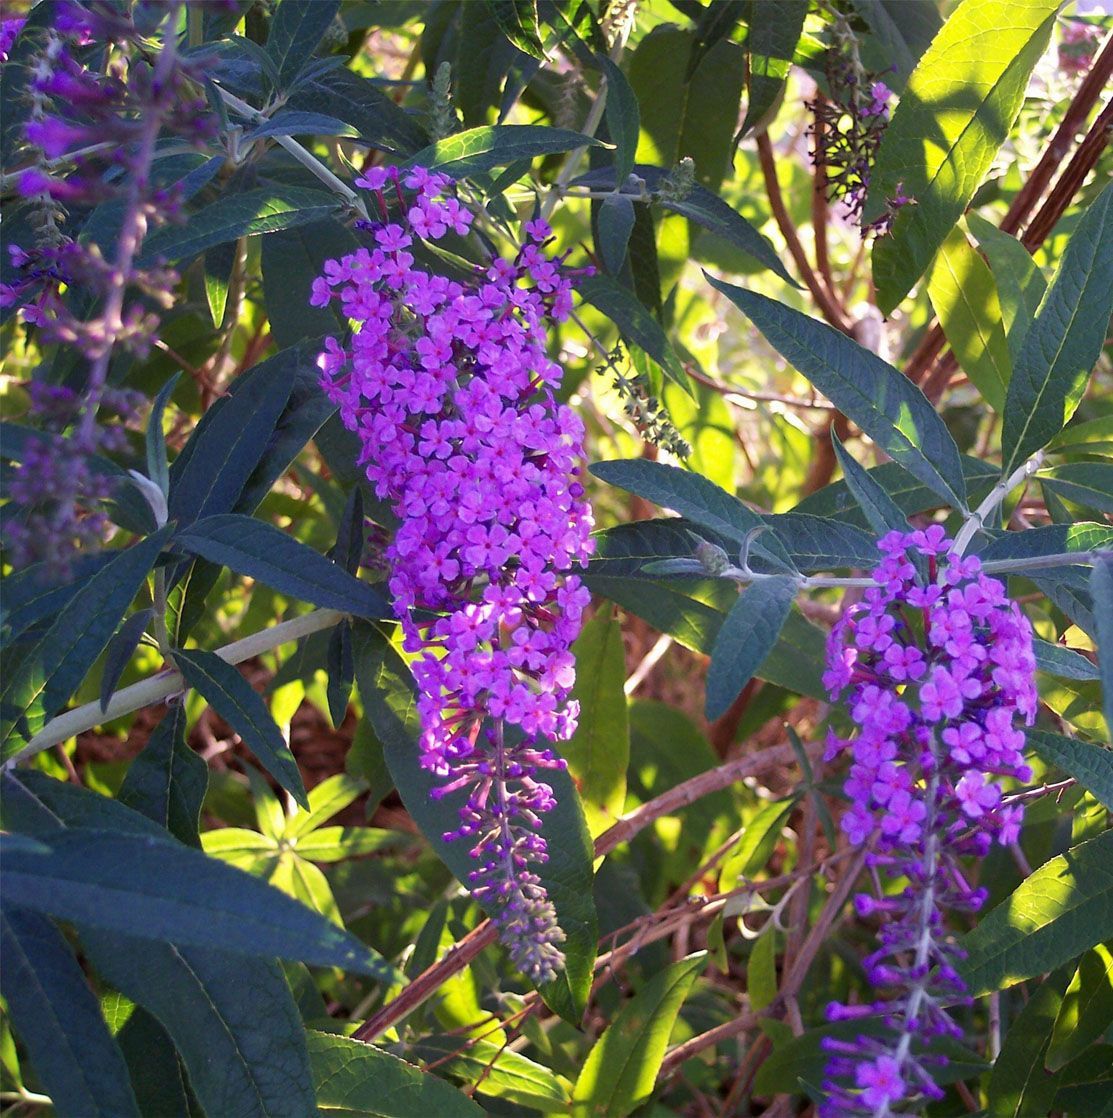 Grow a butterfly bush..Butterfly Bush is one of the easiest shrubs to grow. It is low maintenance, requiring little in the way of